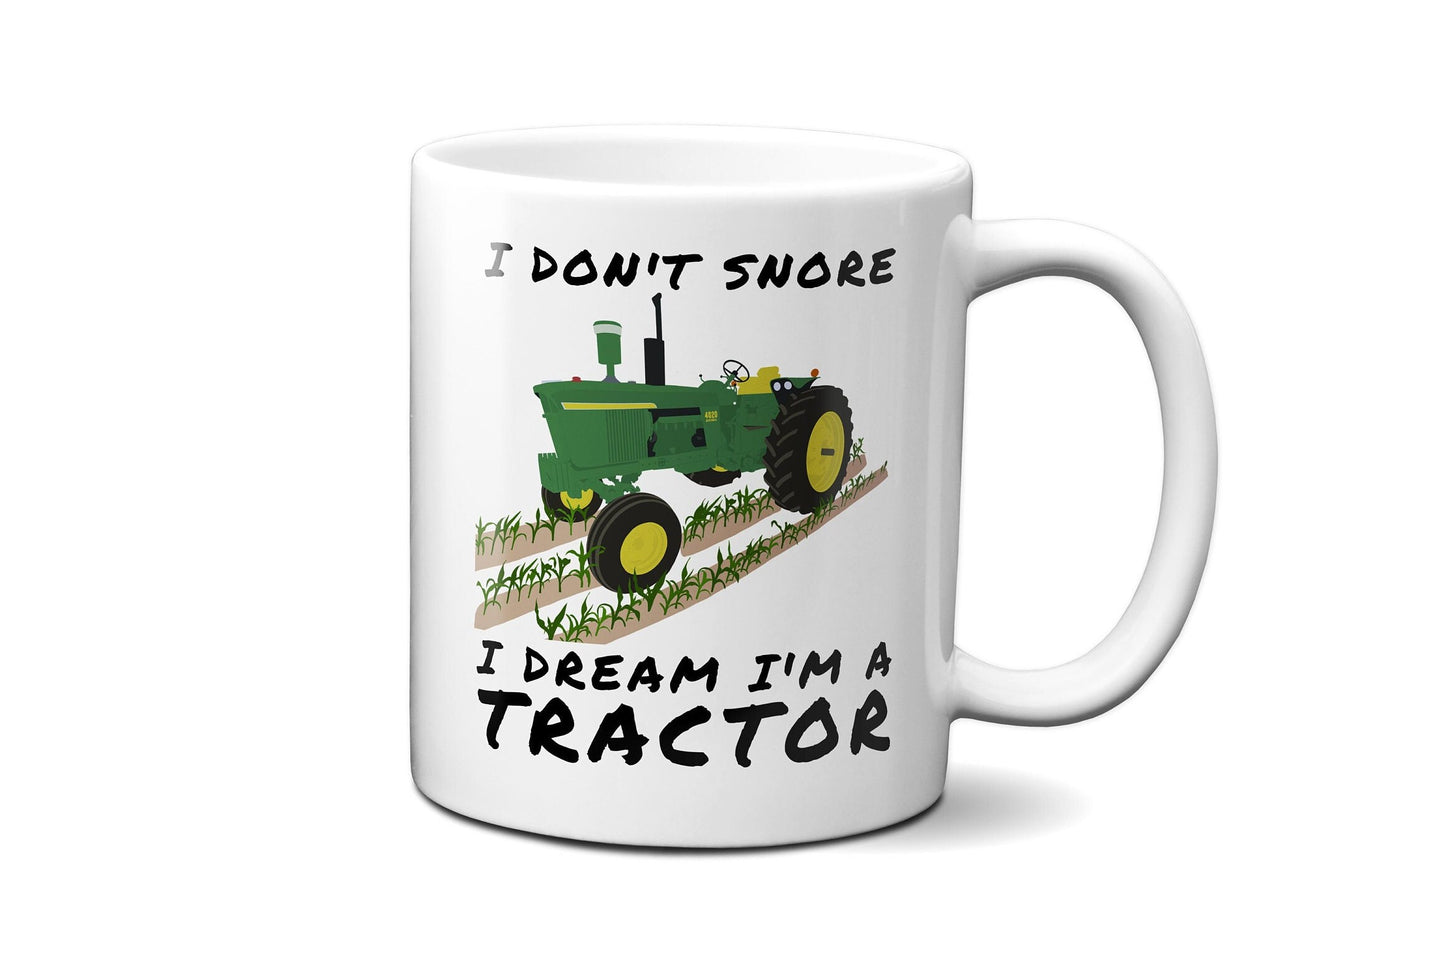 I don't snore I dream I'm a tractor | Funny Farmer | Farmer Gift | John Deere Gift | John Deere Mug | Farmer Christmas Gift | 11 or 15 oz